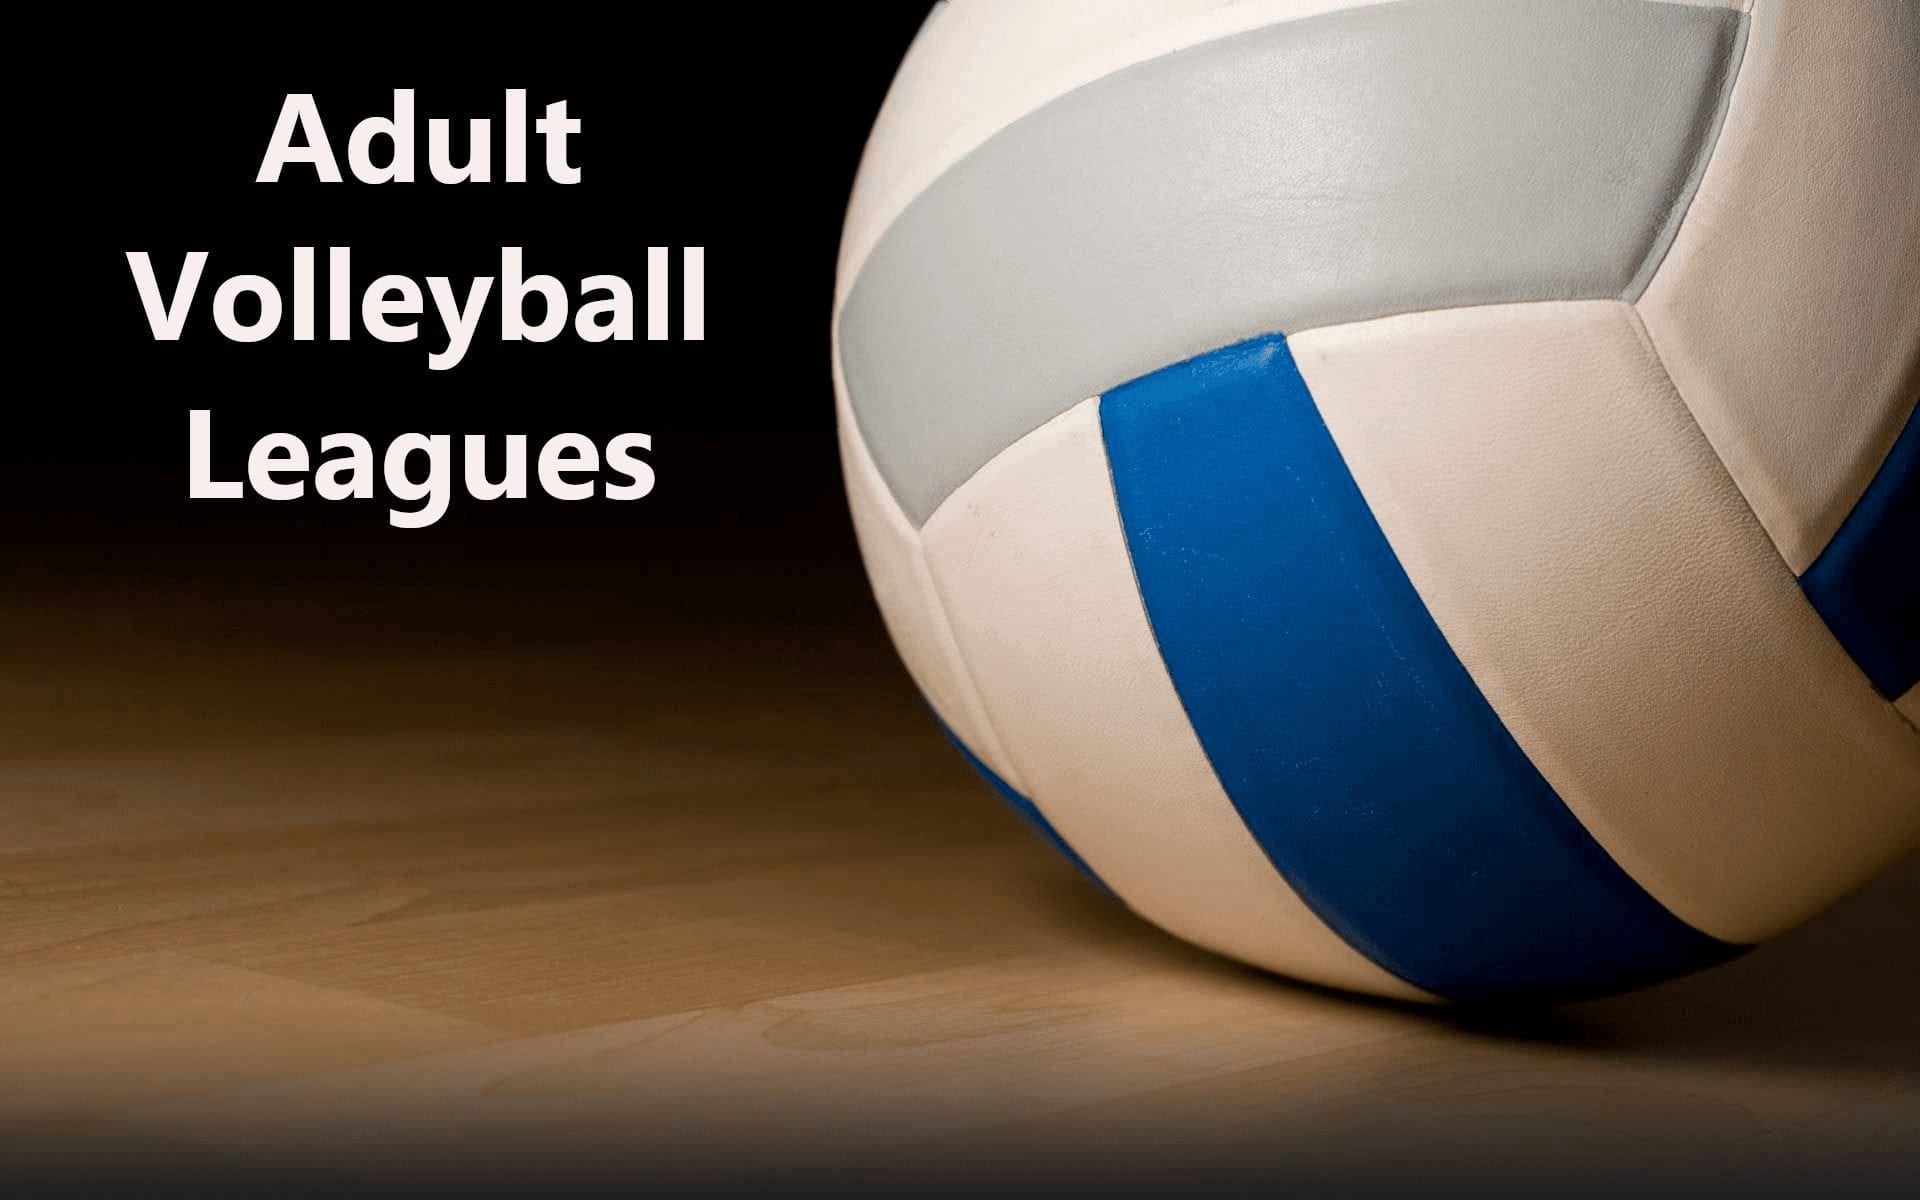 Registration underway for winter adult volleyball leagues | Discover ...